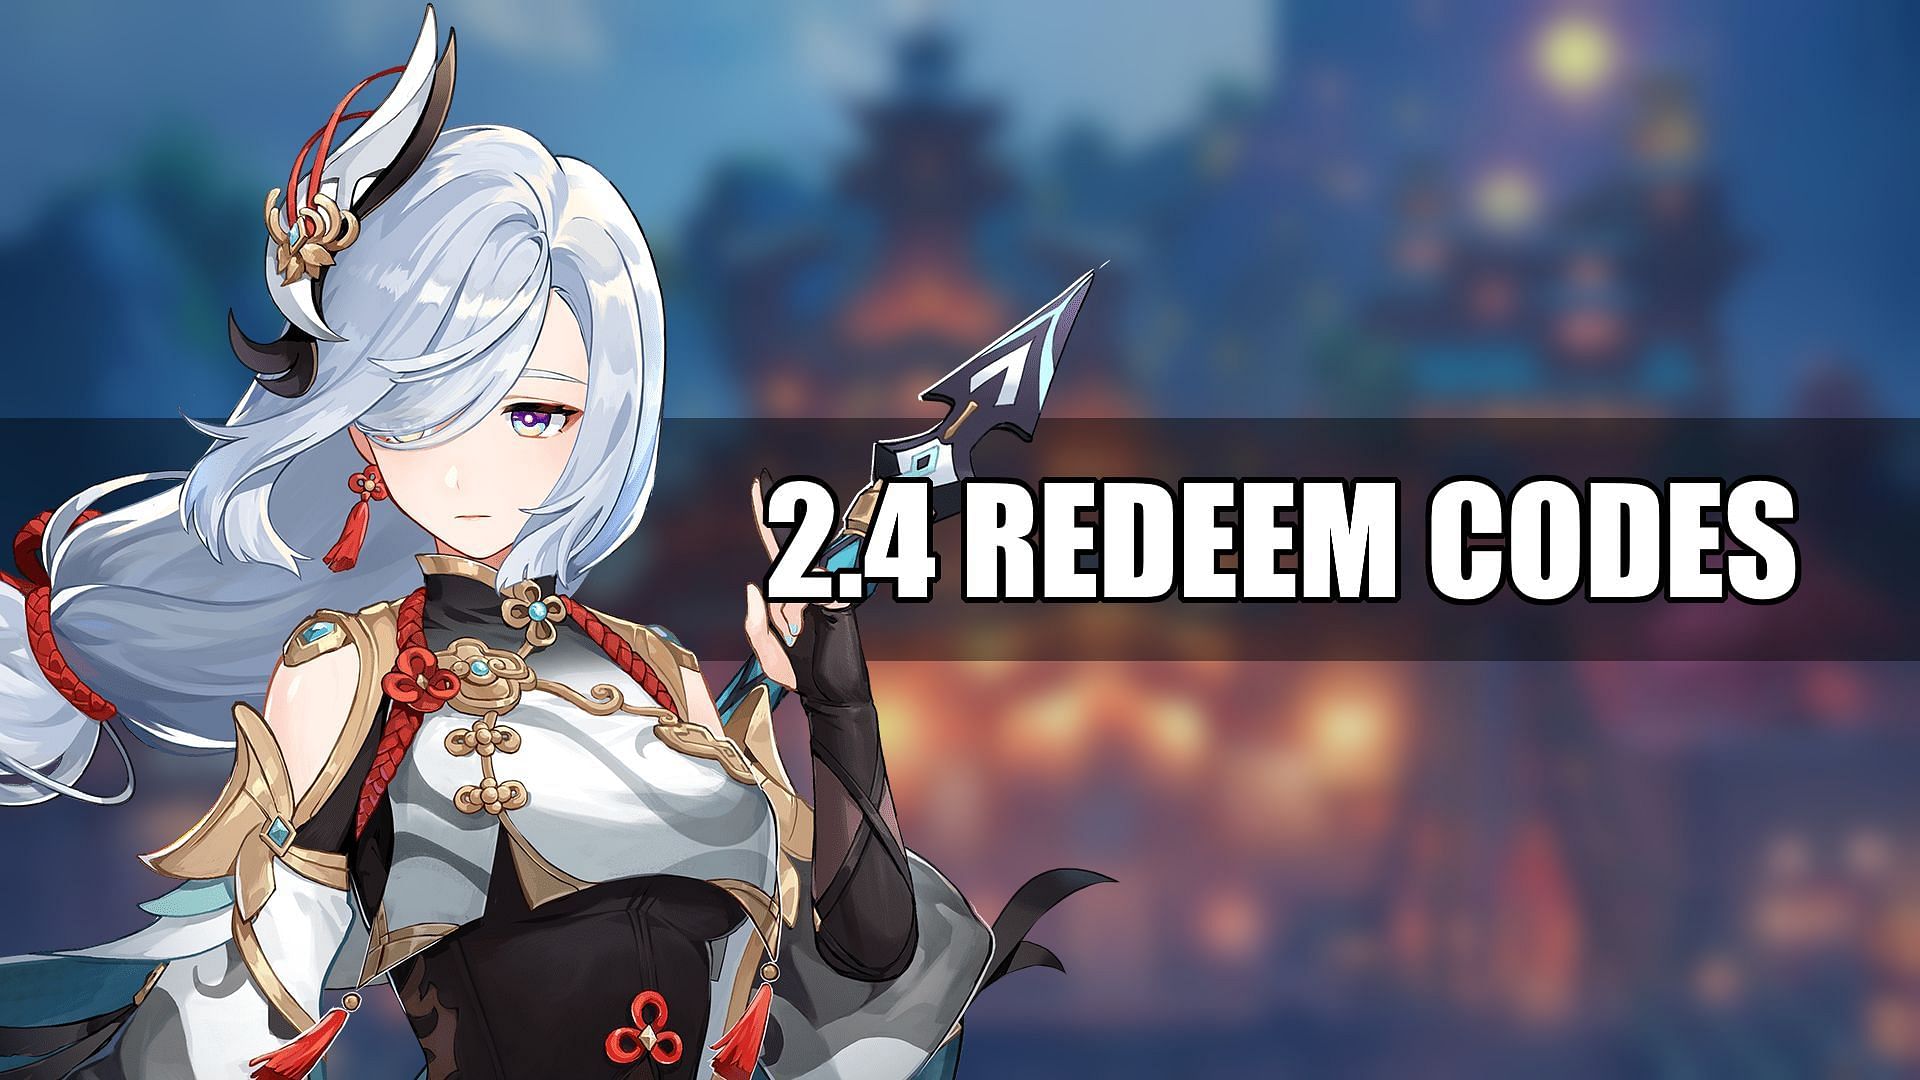 Genshin Impact November 2022 redeem codes: Release date, time, and rewards